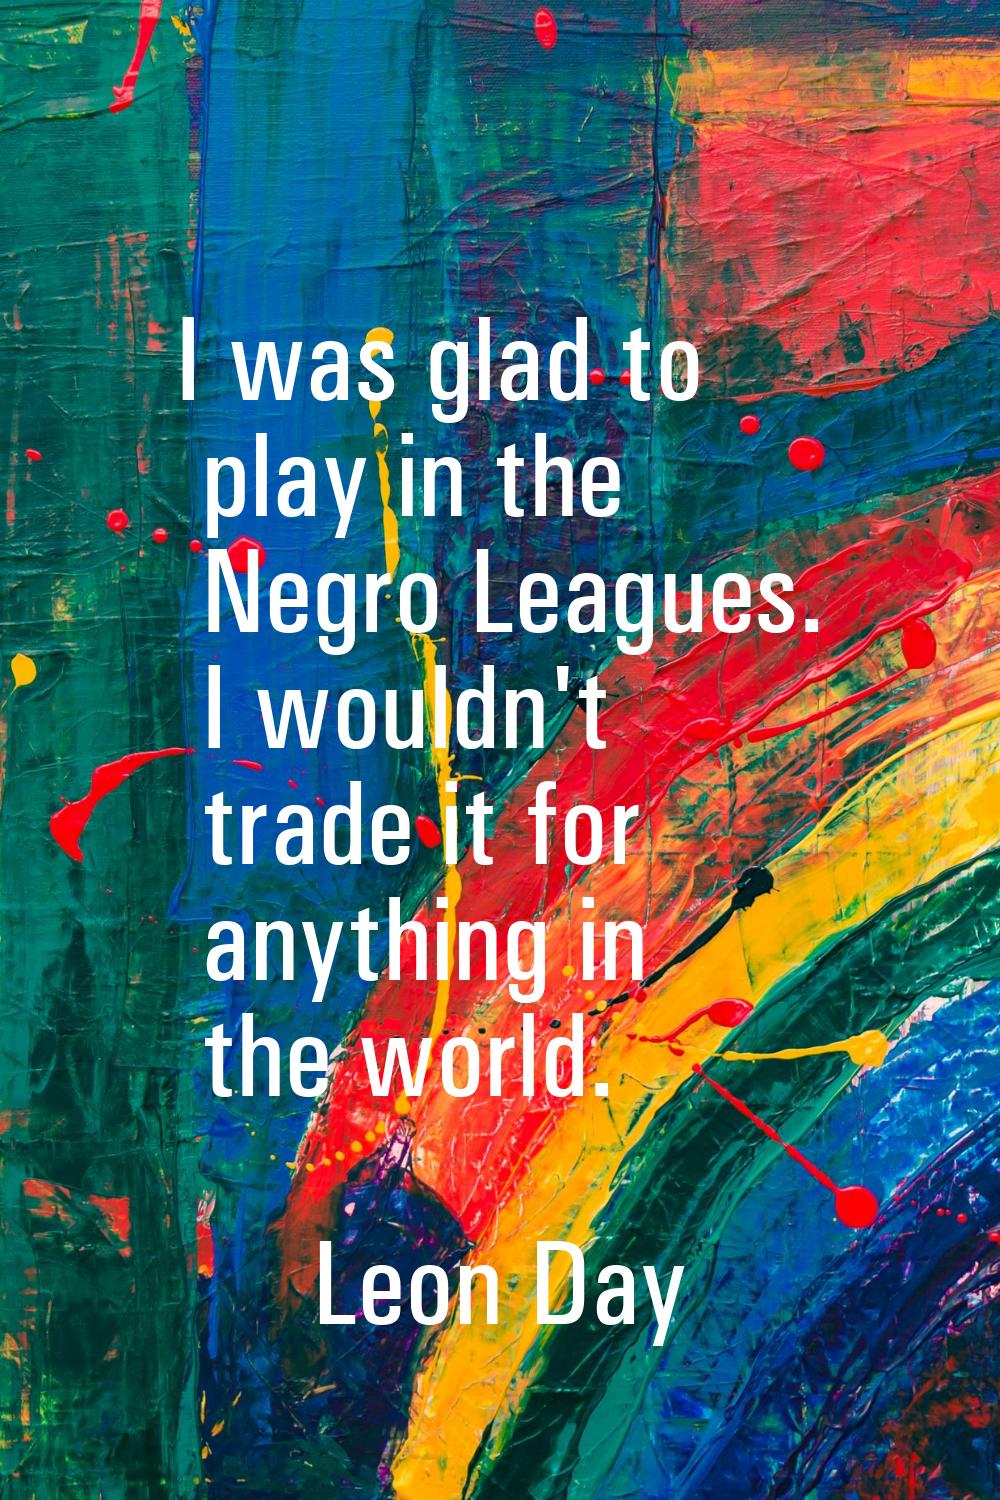 I was glad to play in the Negro Leagues. I wouldn't trade it for anything in the world.